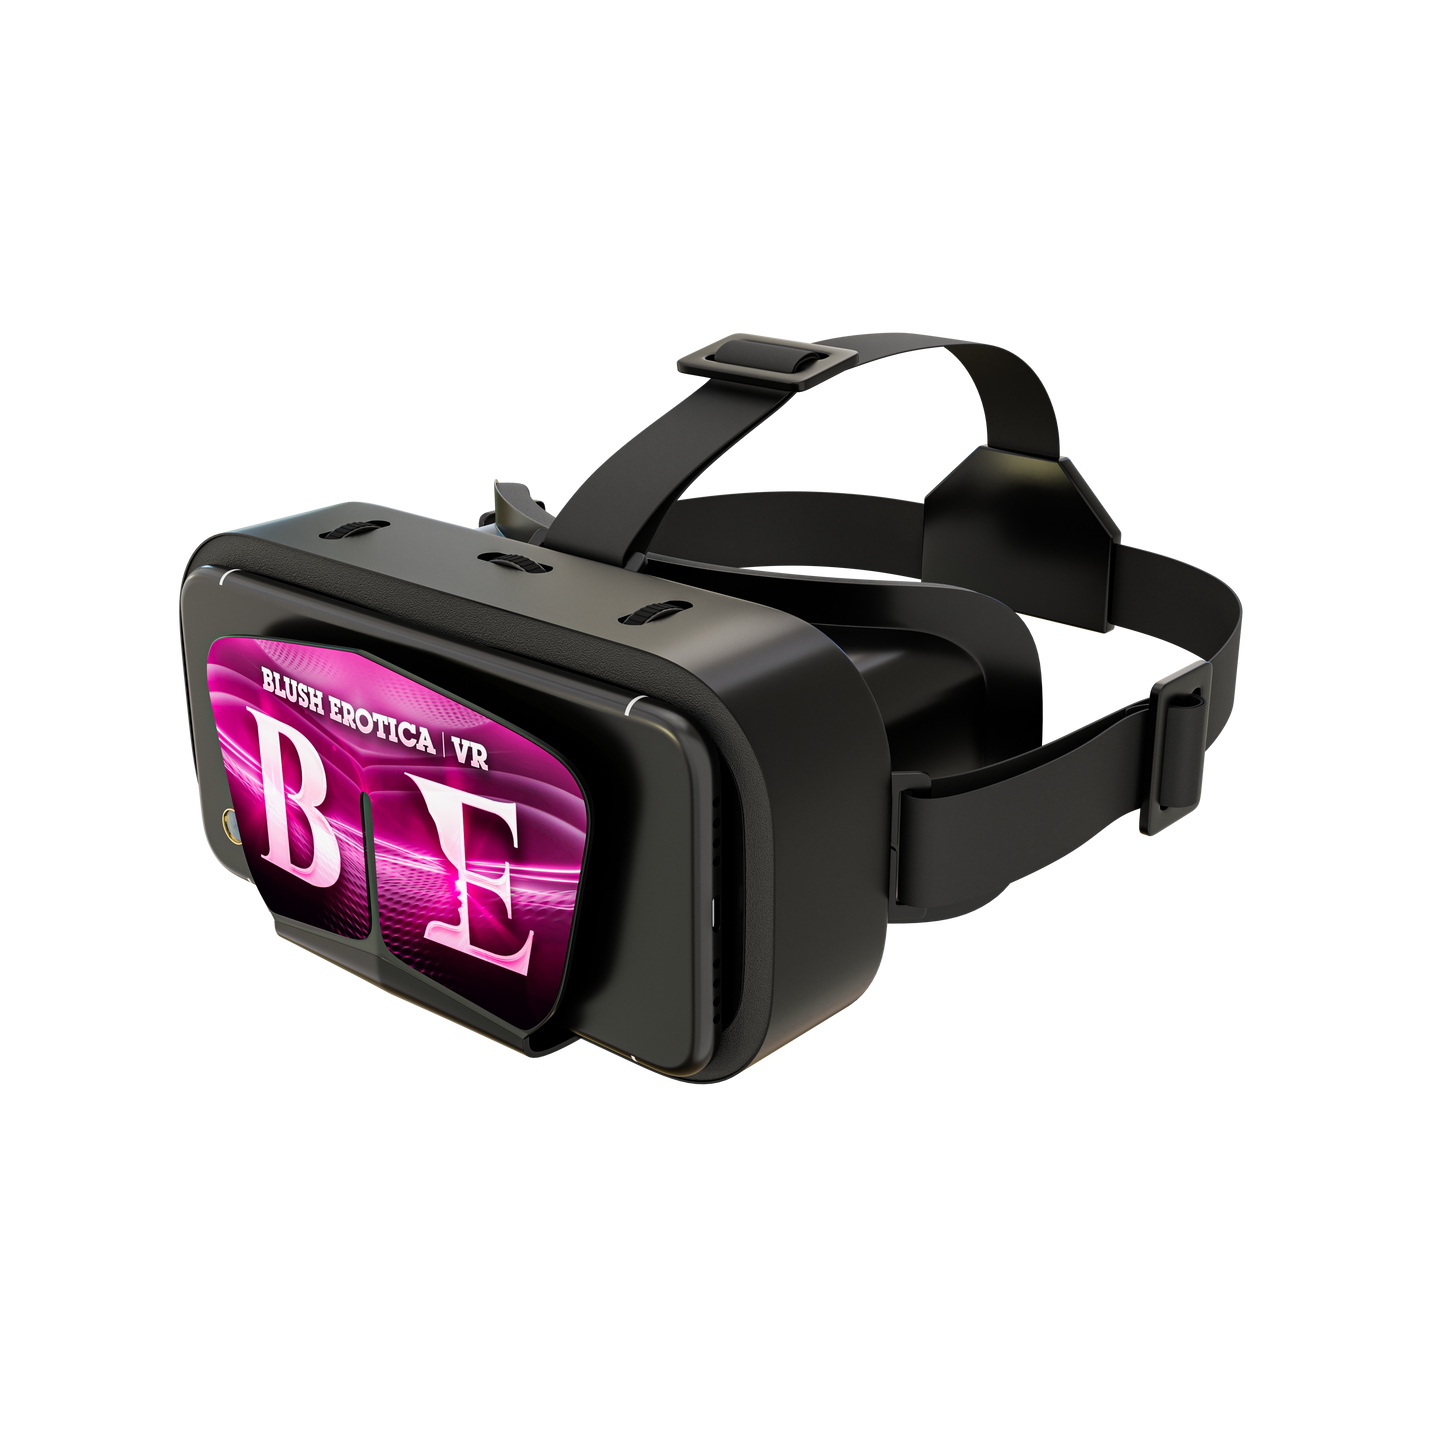 VR Headset Powered by BE